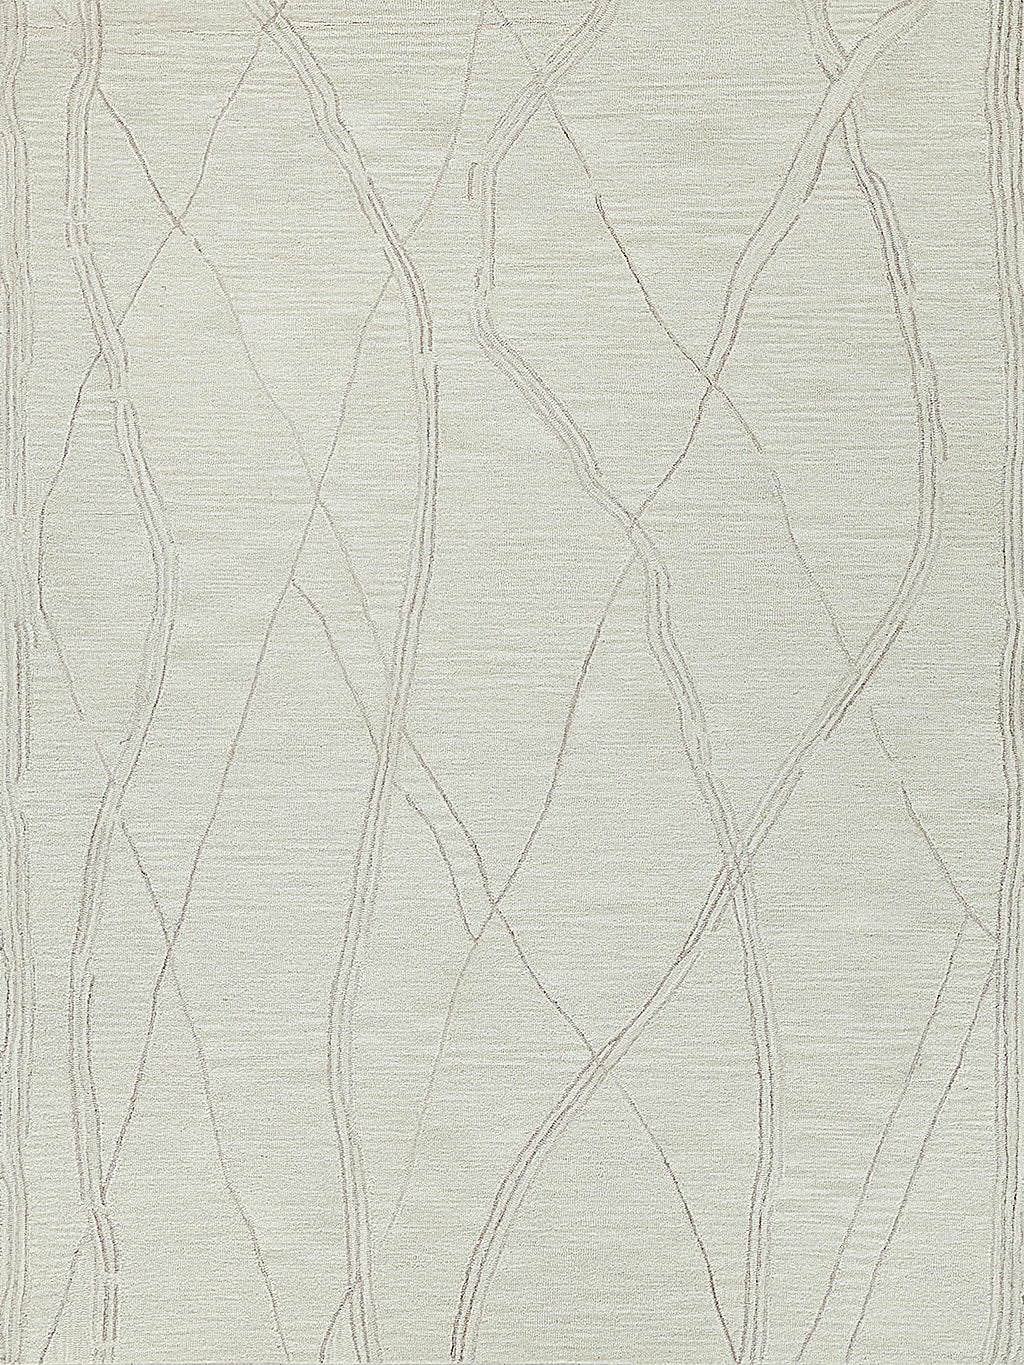 Exquisite Rugs Tangiers 6864 Ivory/Beige Area Rug